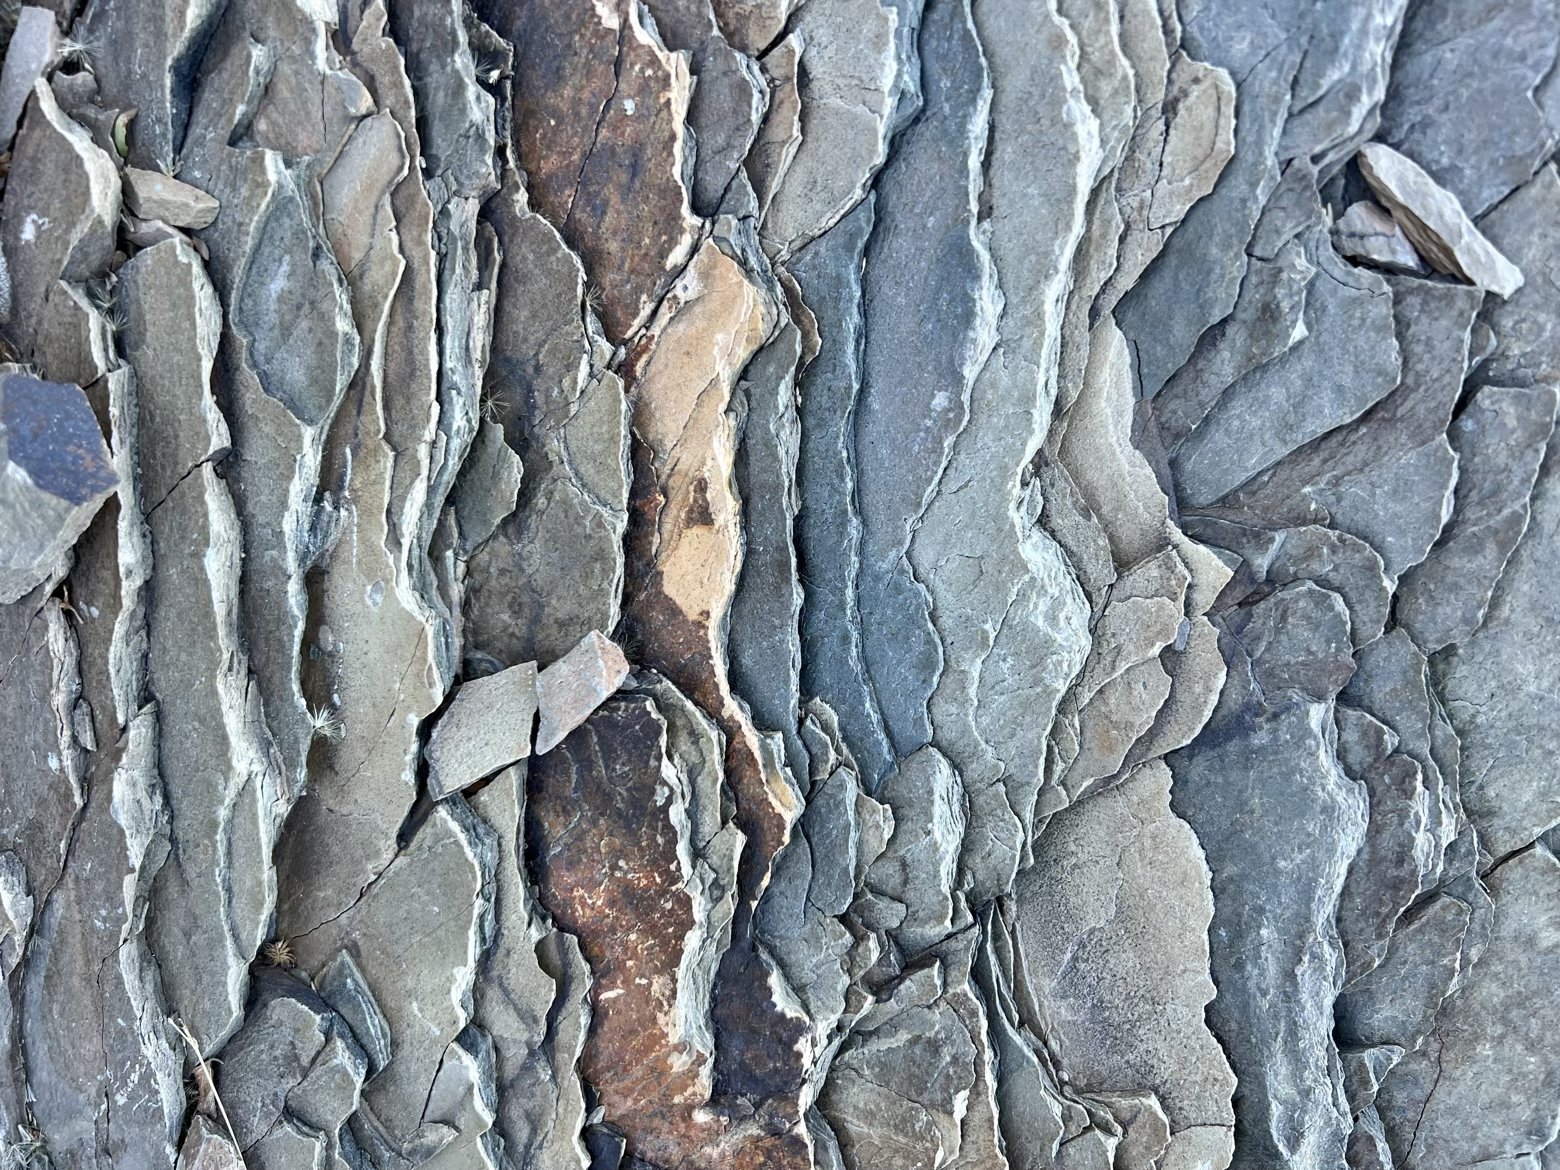 Thin layers of multi-colored rock (slate?)